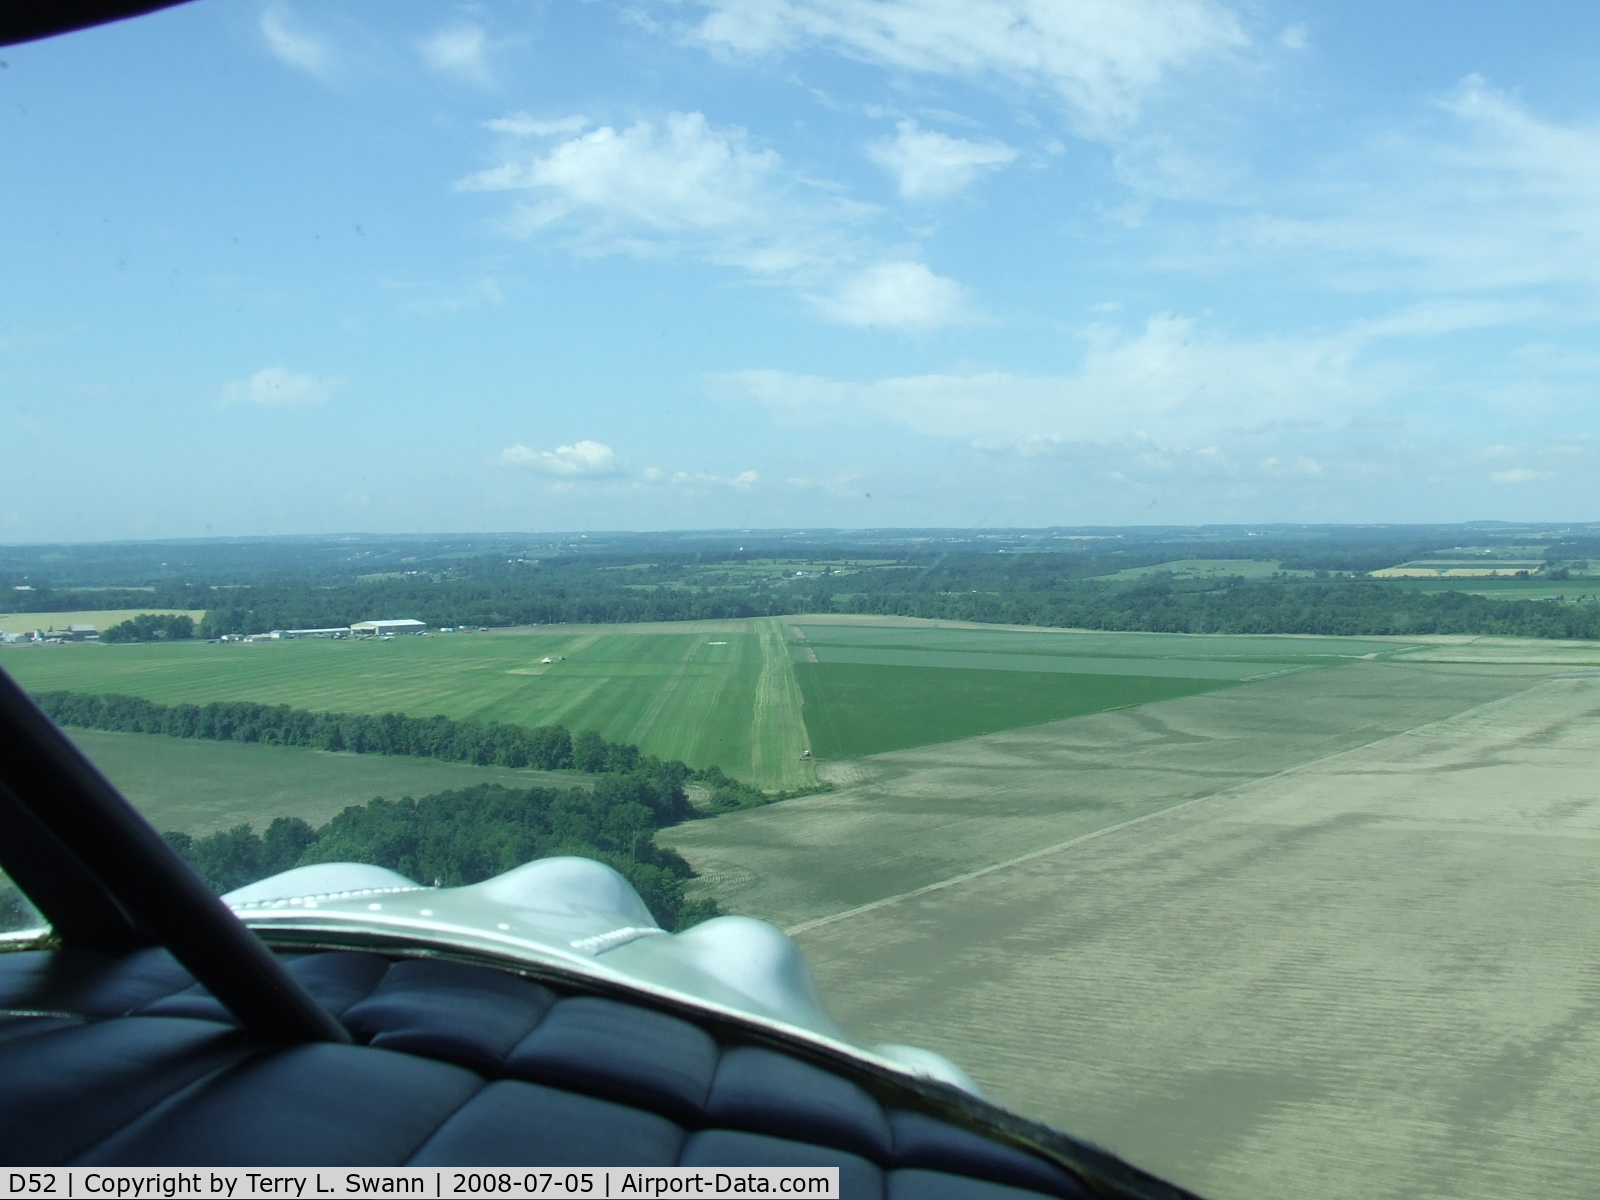 Geneseo Airport (D52) - On final at Geneseo in a Stinson SR-9C.